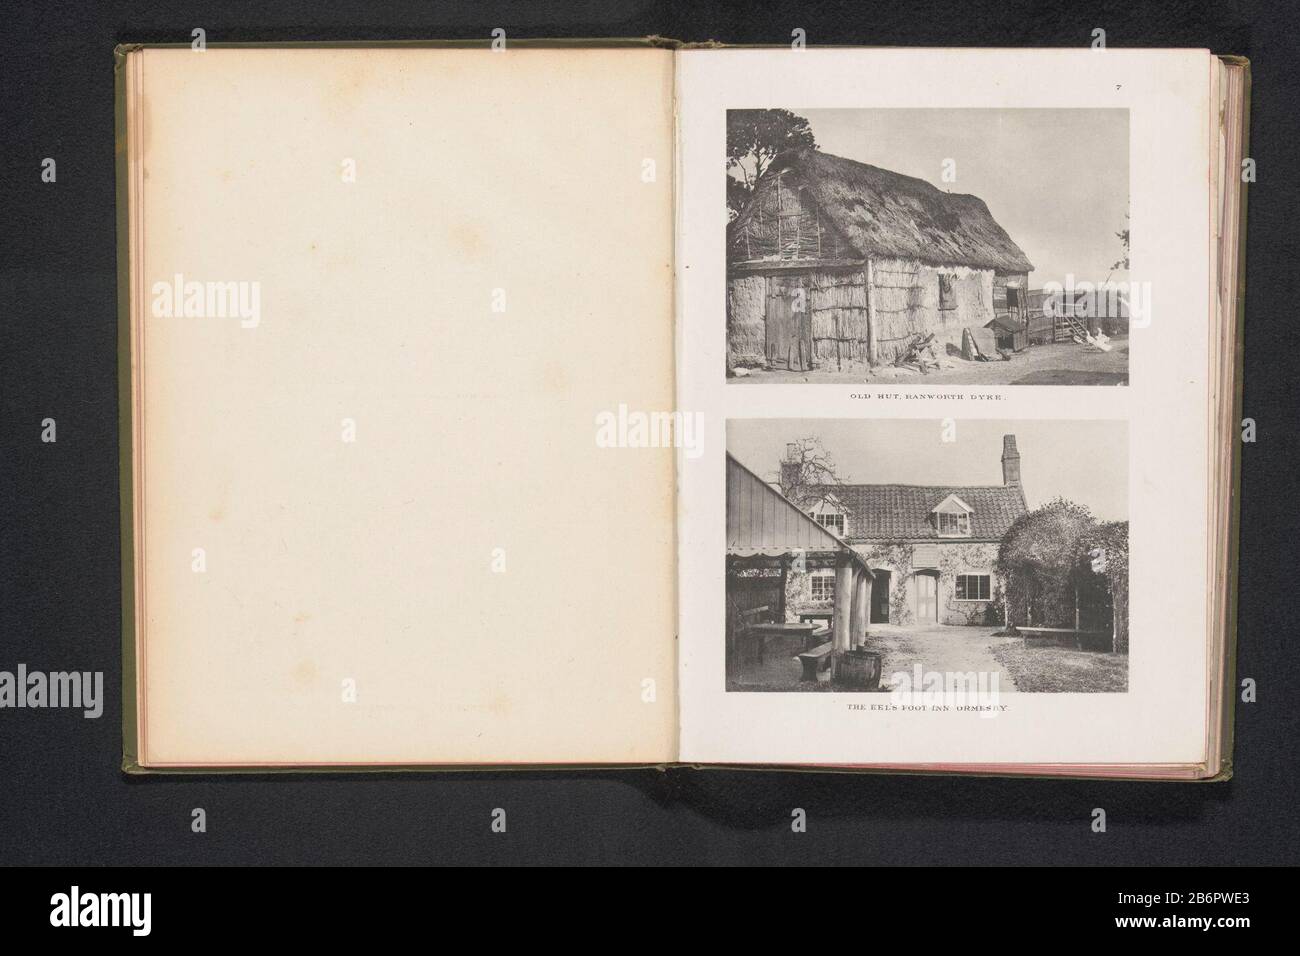 Gezicht op de herberg The Eel's Foot Inn The Eel's Foot Inn Ormesby (titel op object) View of the inn The Eel's Foot InnThe Eel's Foot Inn Ormesby (title object) Property Type: photomechanical print page Item number: RP-F 2001-7-1162-13 Manufacturer : Photographer: John Payne Jenningsclichémaker: Ashtead Standing Photo printing Work Place manufacture: photographer: Suffolkclichémaker: Surrey Dating: about 1886 - or for 1891 Material: paper Technique: light pressure measurements: imprinted: h 79mm × W 115 mmToelichtingPrent page 7. Subject: hotel, hostelry, inn Stock Photo